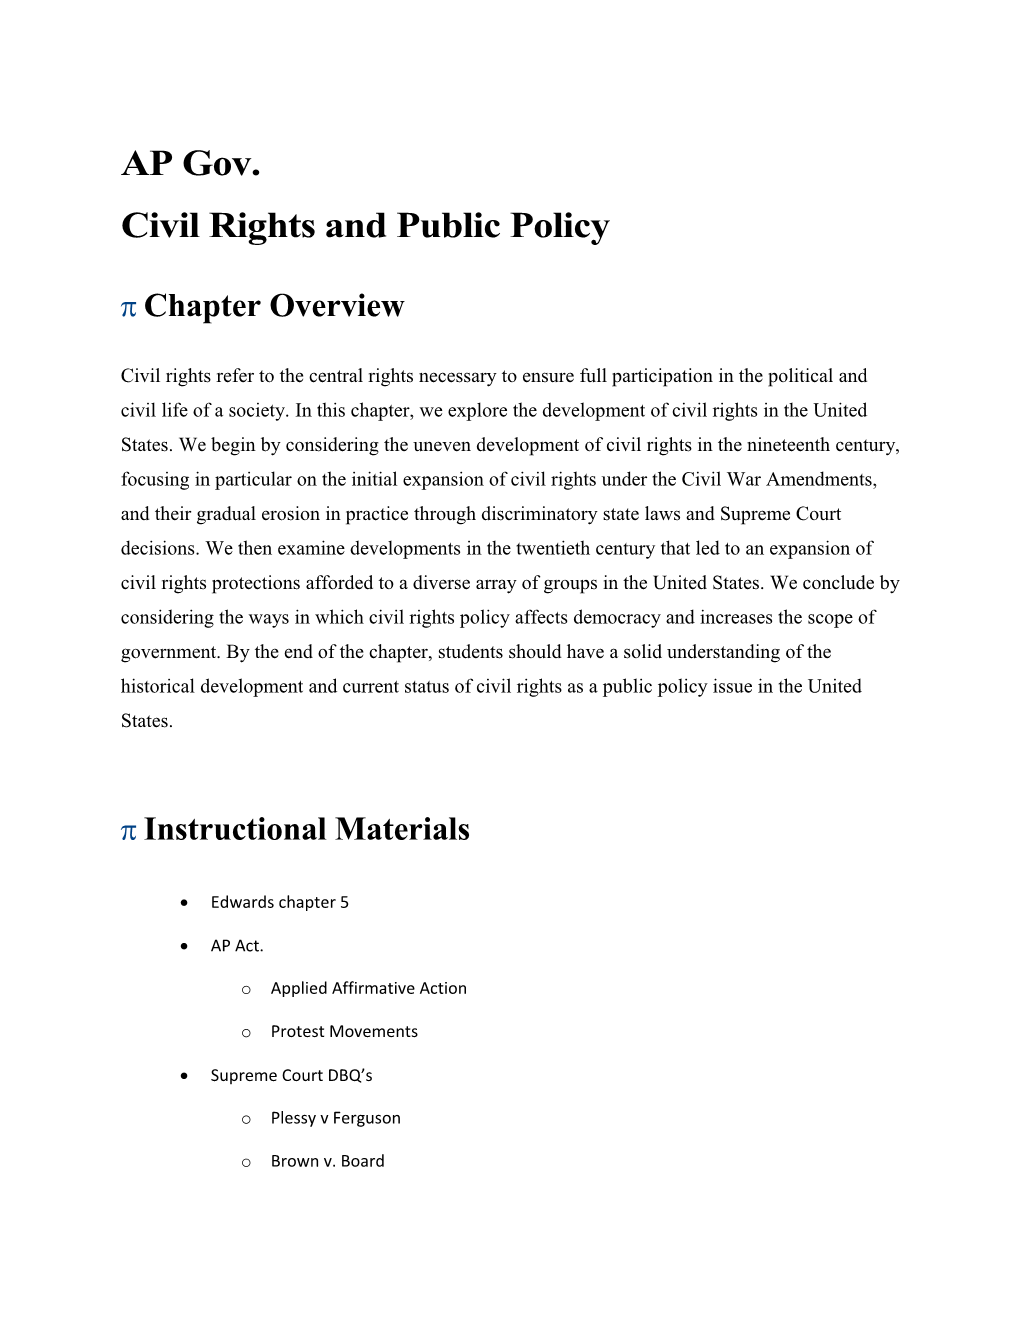 Civil Rights and Public Policy